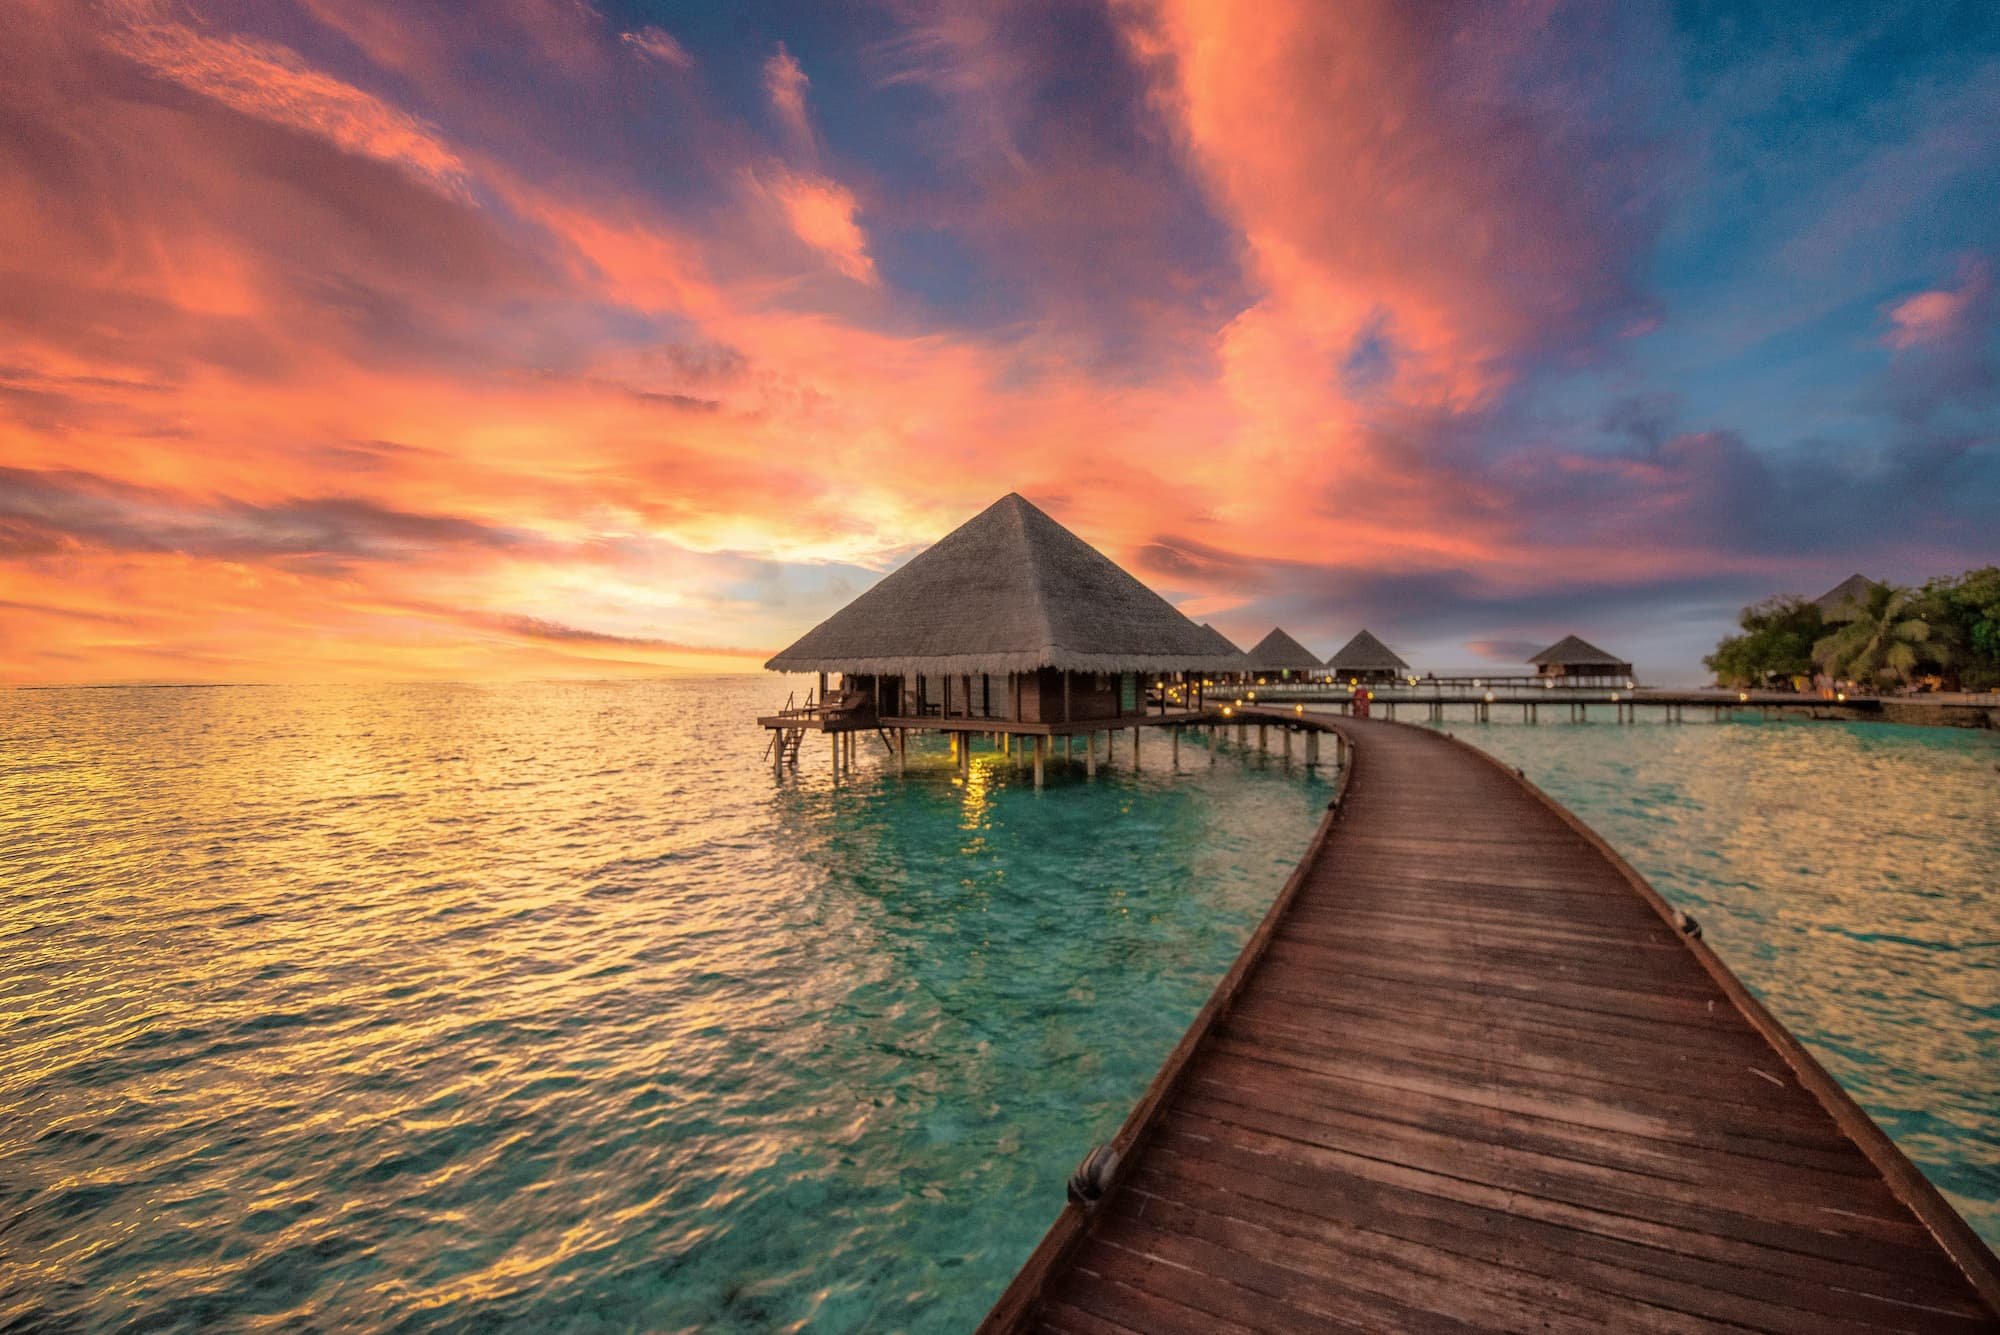 dock leading to an overwater bungalow in the ocean